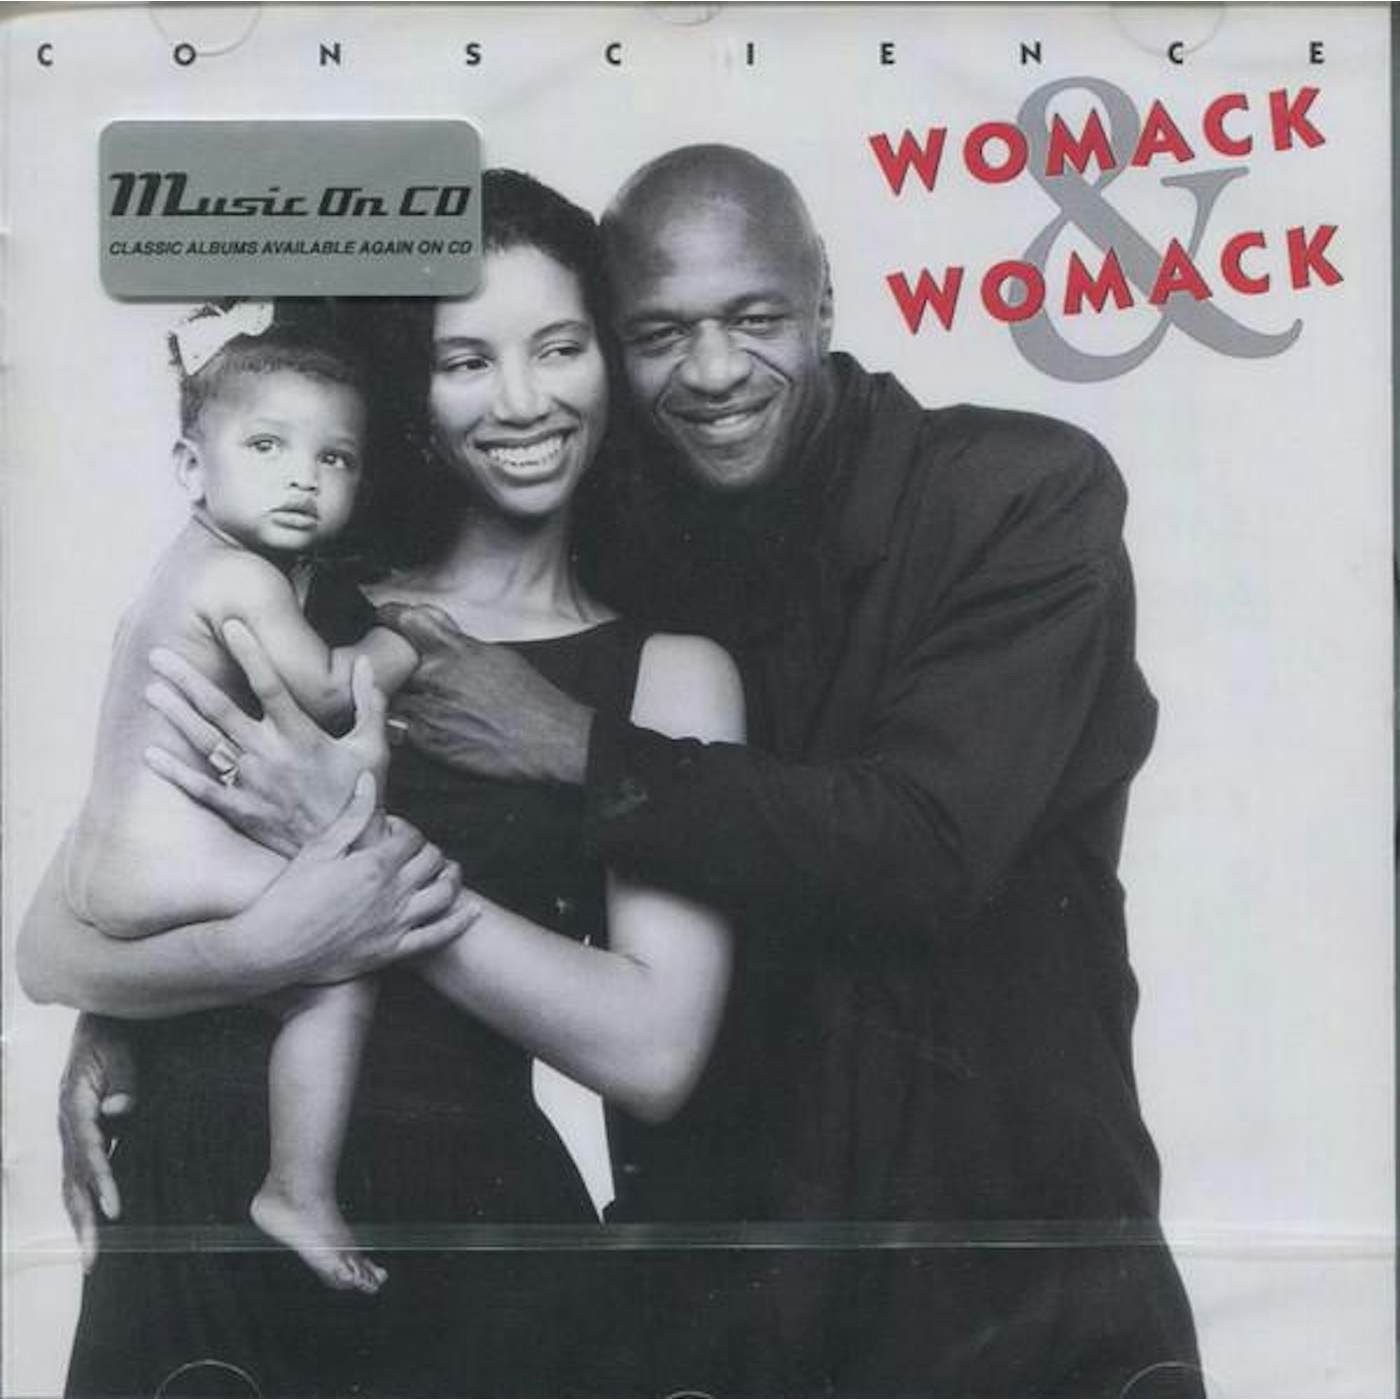 Womack & Womack CONSCIENCE CD